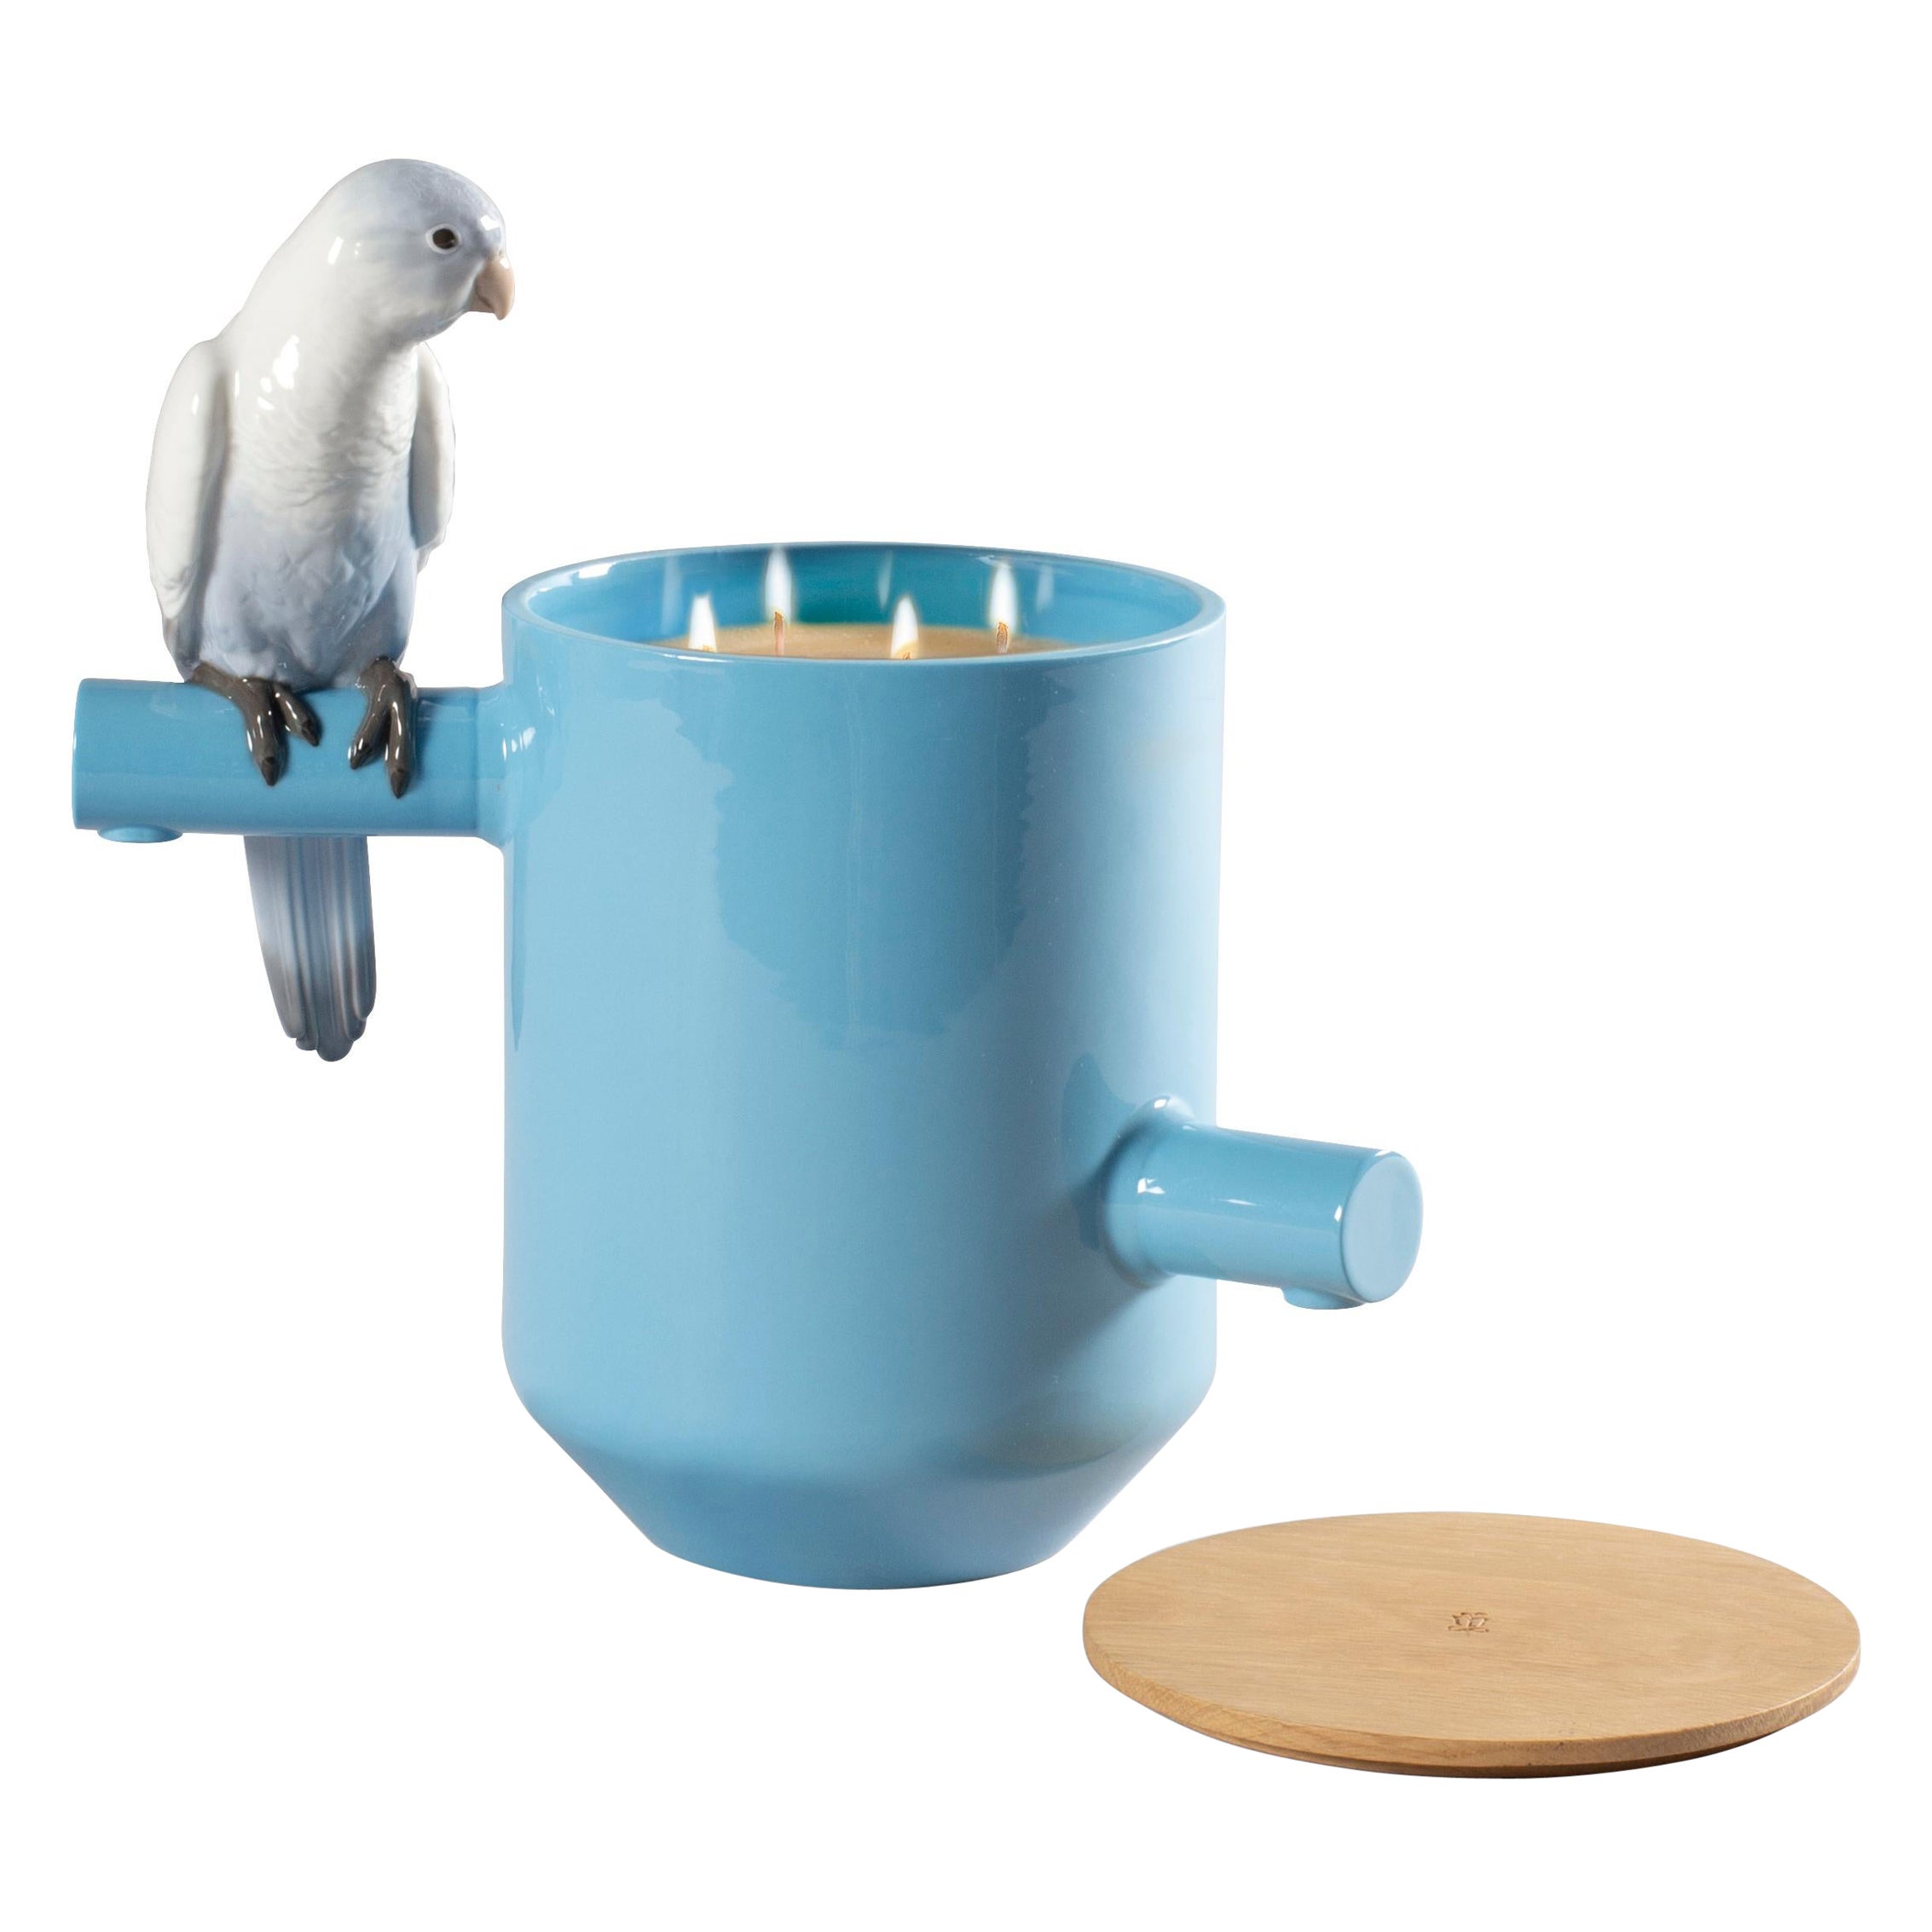 Parrot's Scented Treasure Candle. On the prairie Scent. Blue